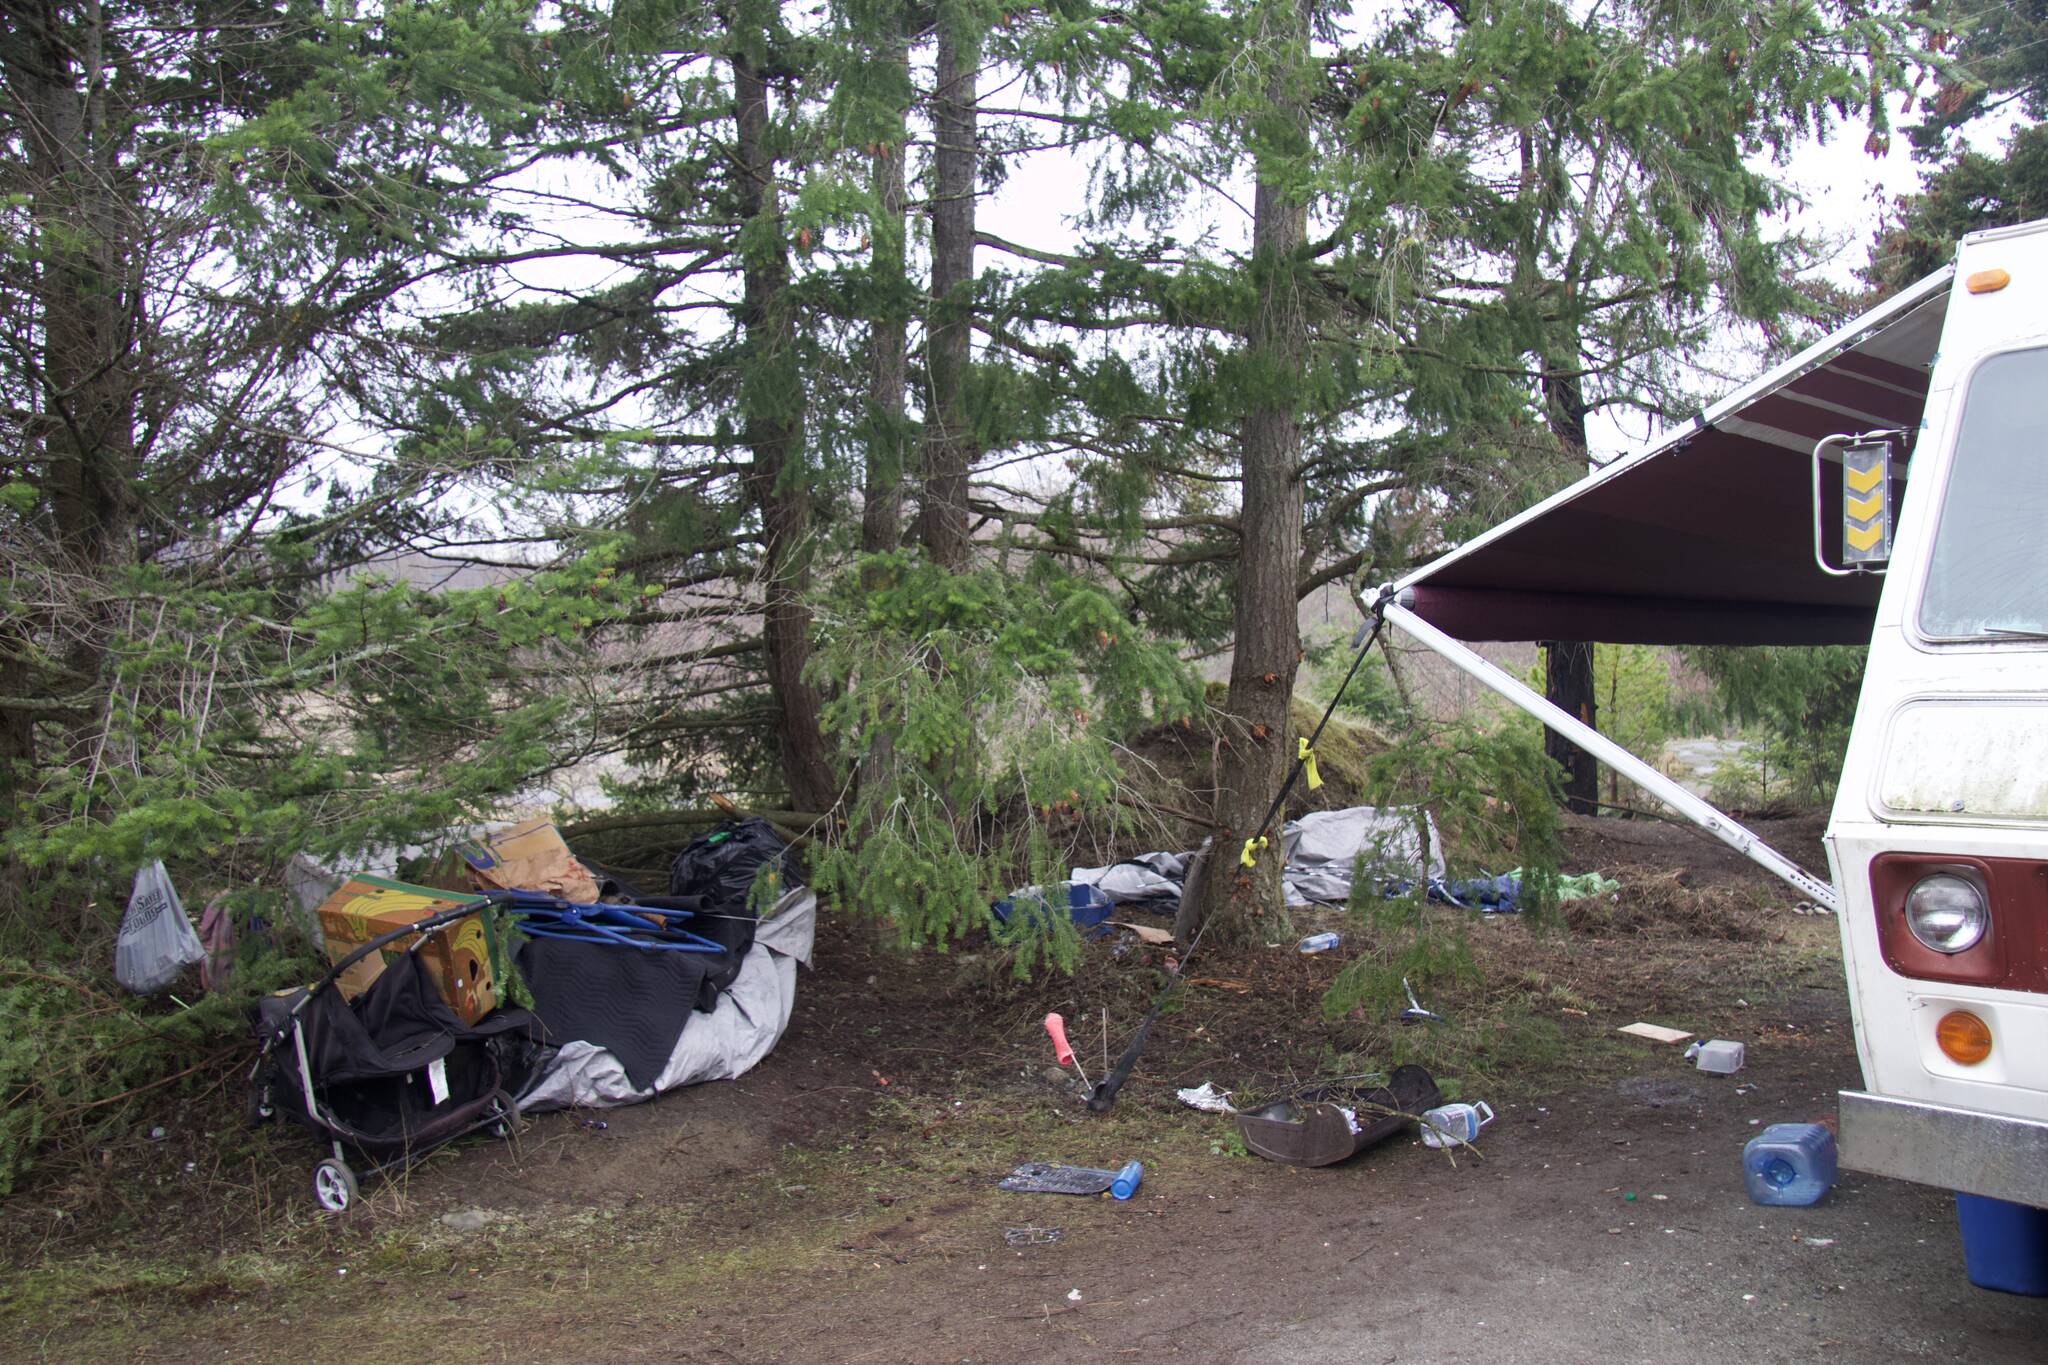 Photo by Rachel Rosen/Whidbey News-Times
Nearby residents are concerned about garbage the homeless camp creates.